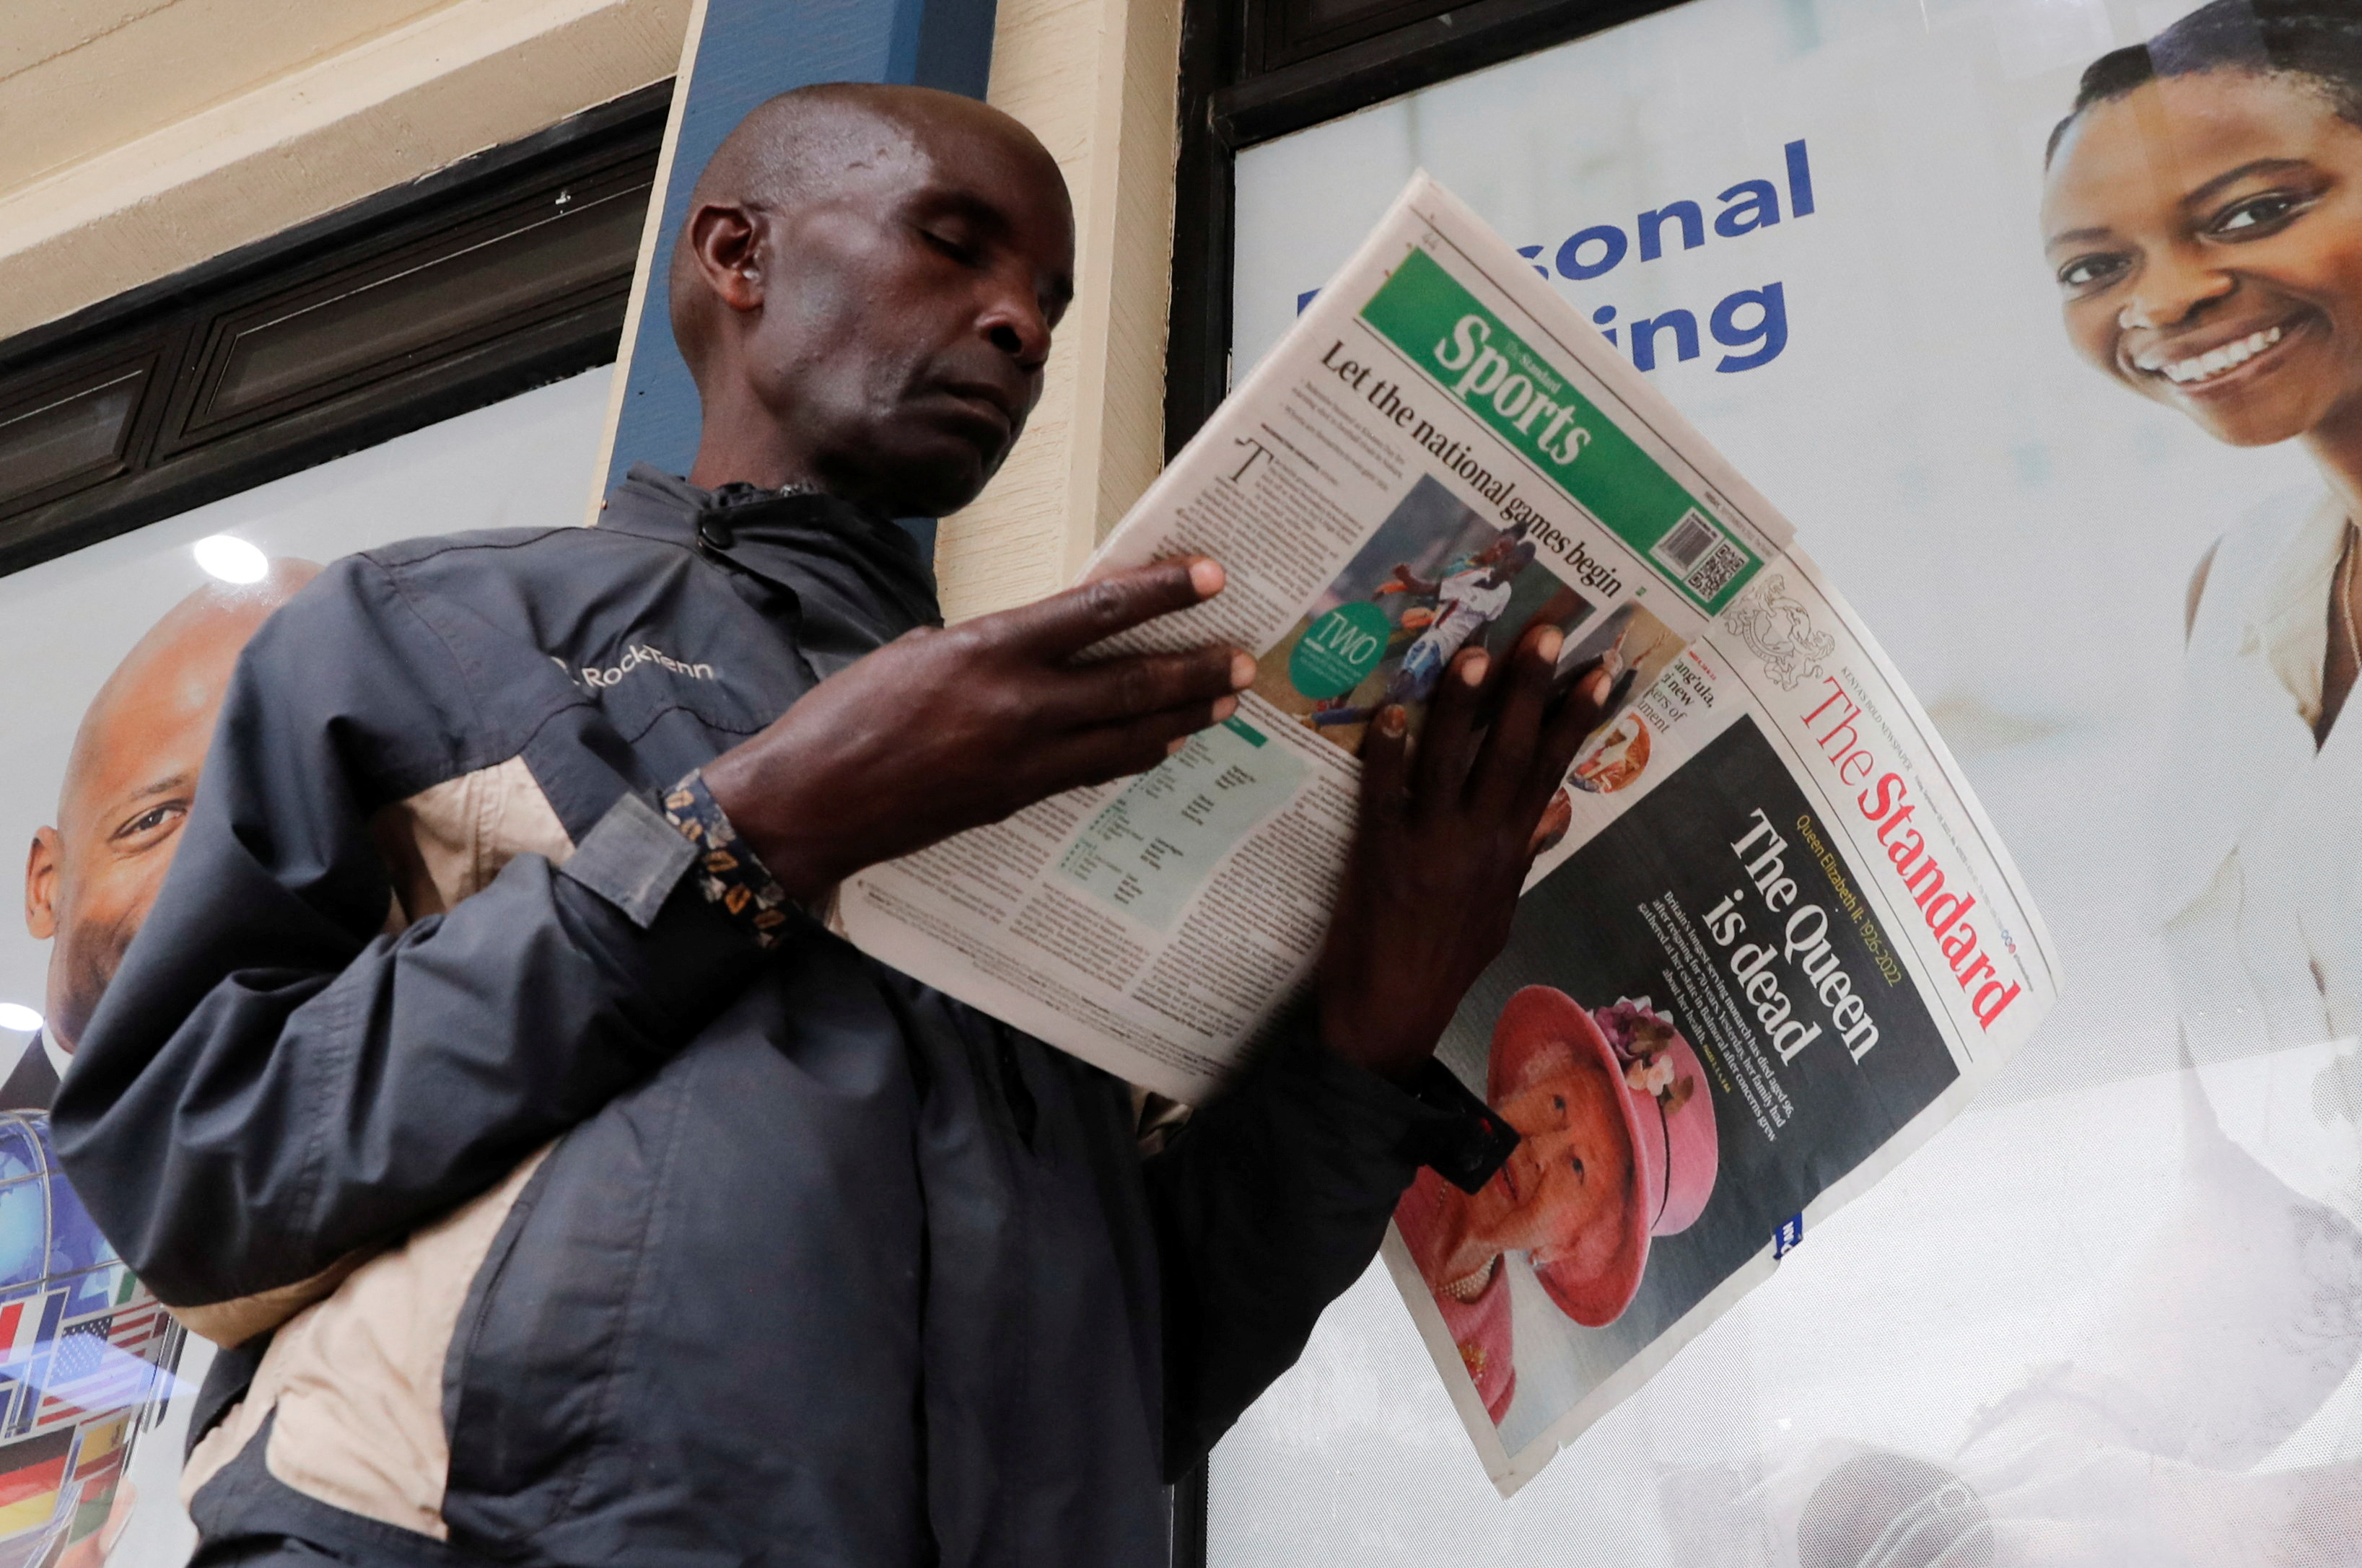 A man reads a newspaper reporting on the death of Queen Elizabeth, Britain's longest-reigning monarch, in Nairobi